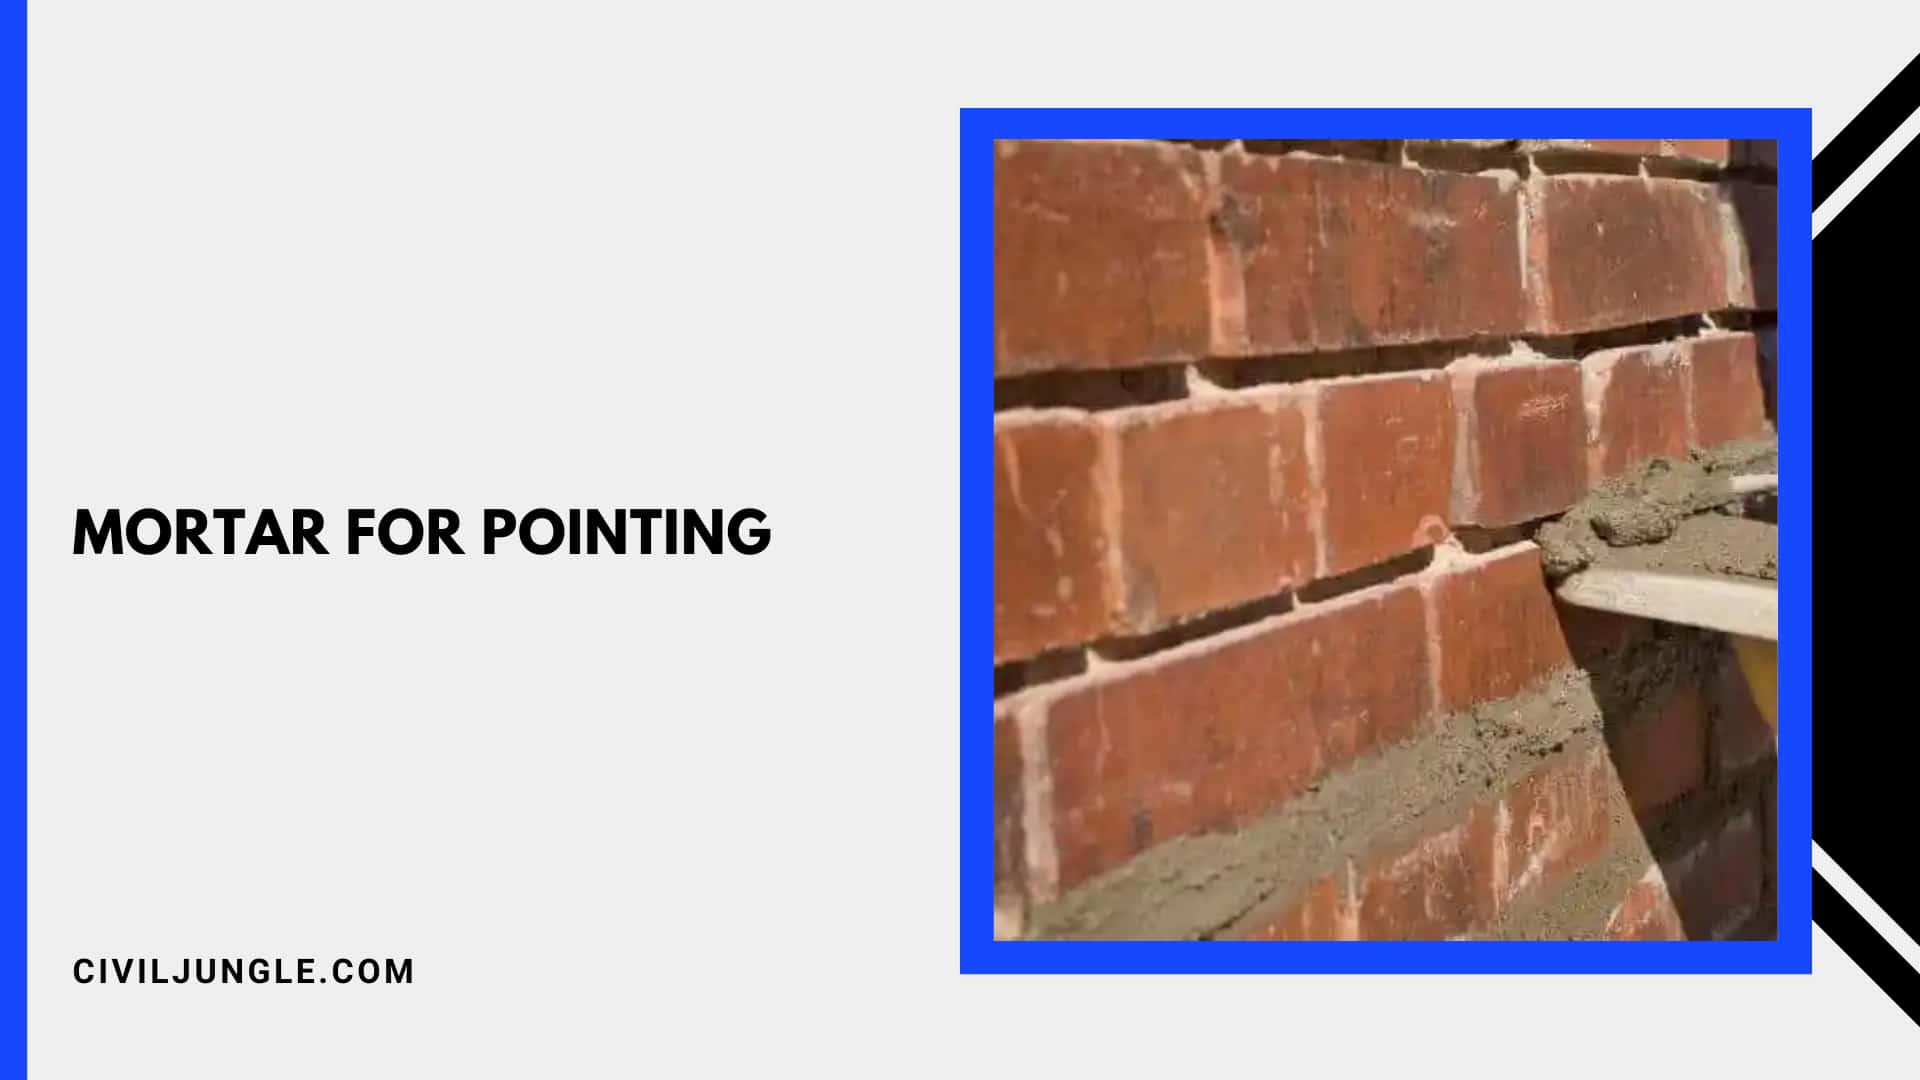 Mortar for Pointing